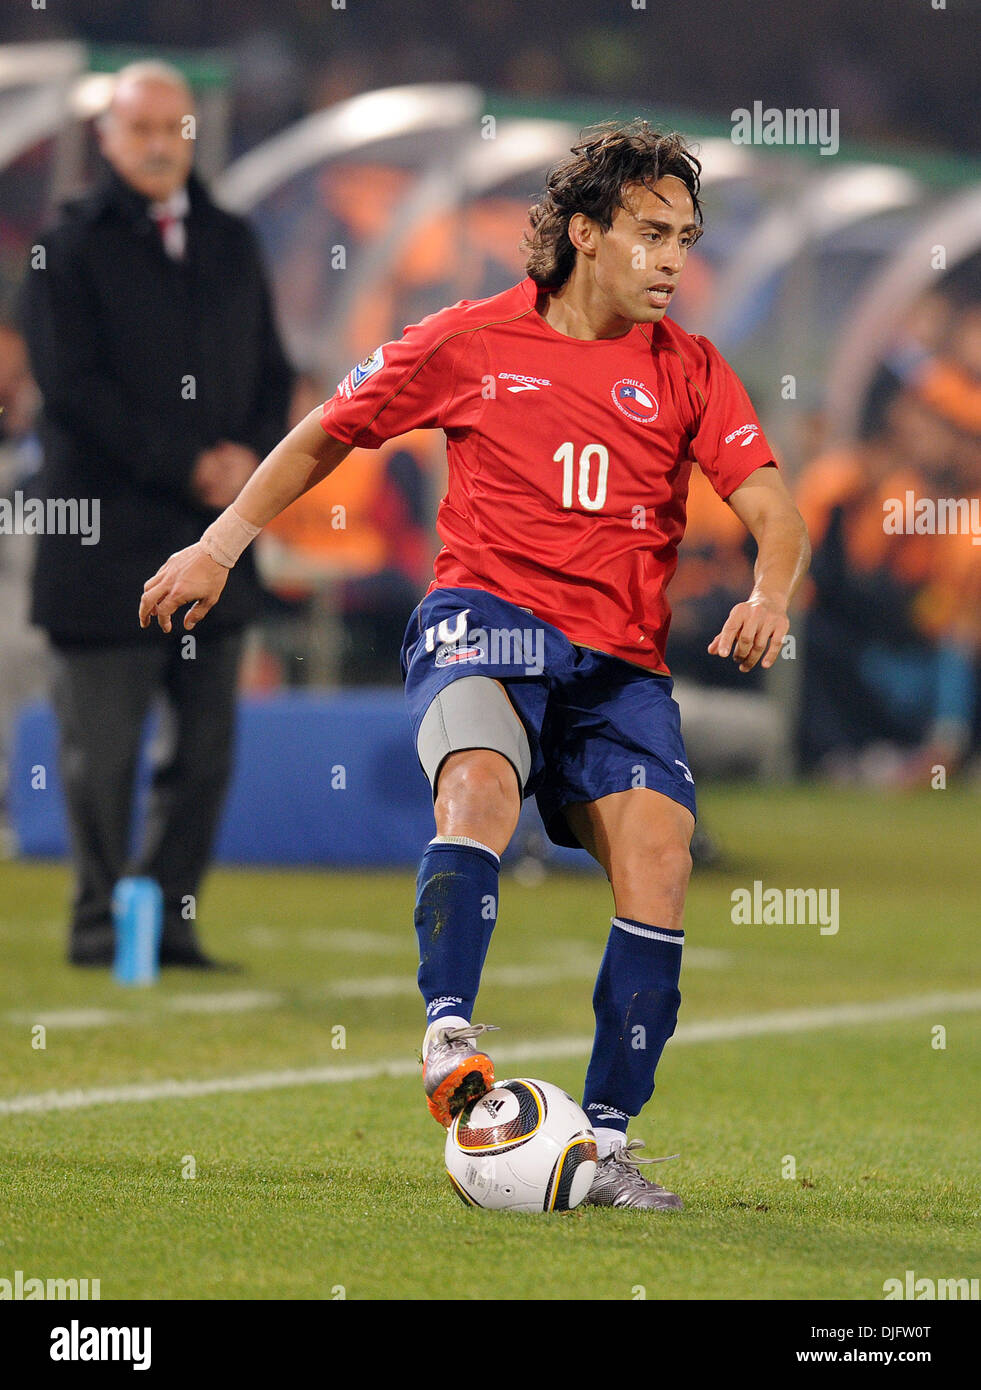 June 25, 2010 - Pretoria, South Africa - Jorge Valdivia of Chile in action during the 2010 FIFA World Cup soccer match between Chile and Spain at Loftus Versfeld Stadium on June 25, 2010 in Pretoria, South Africa. (Credit Image: © Luca Ghidoni/ZUMApress.com) Stock Photo